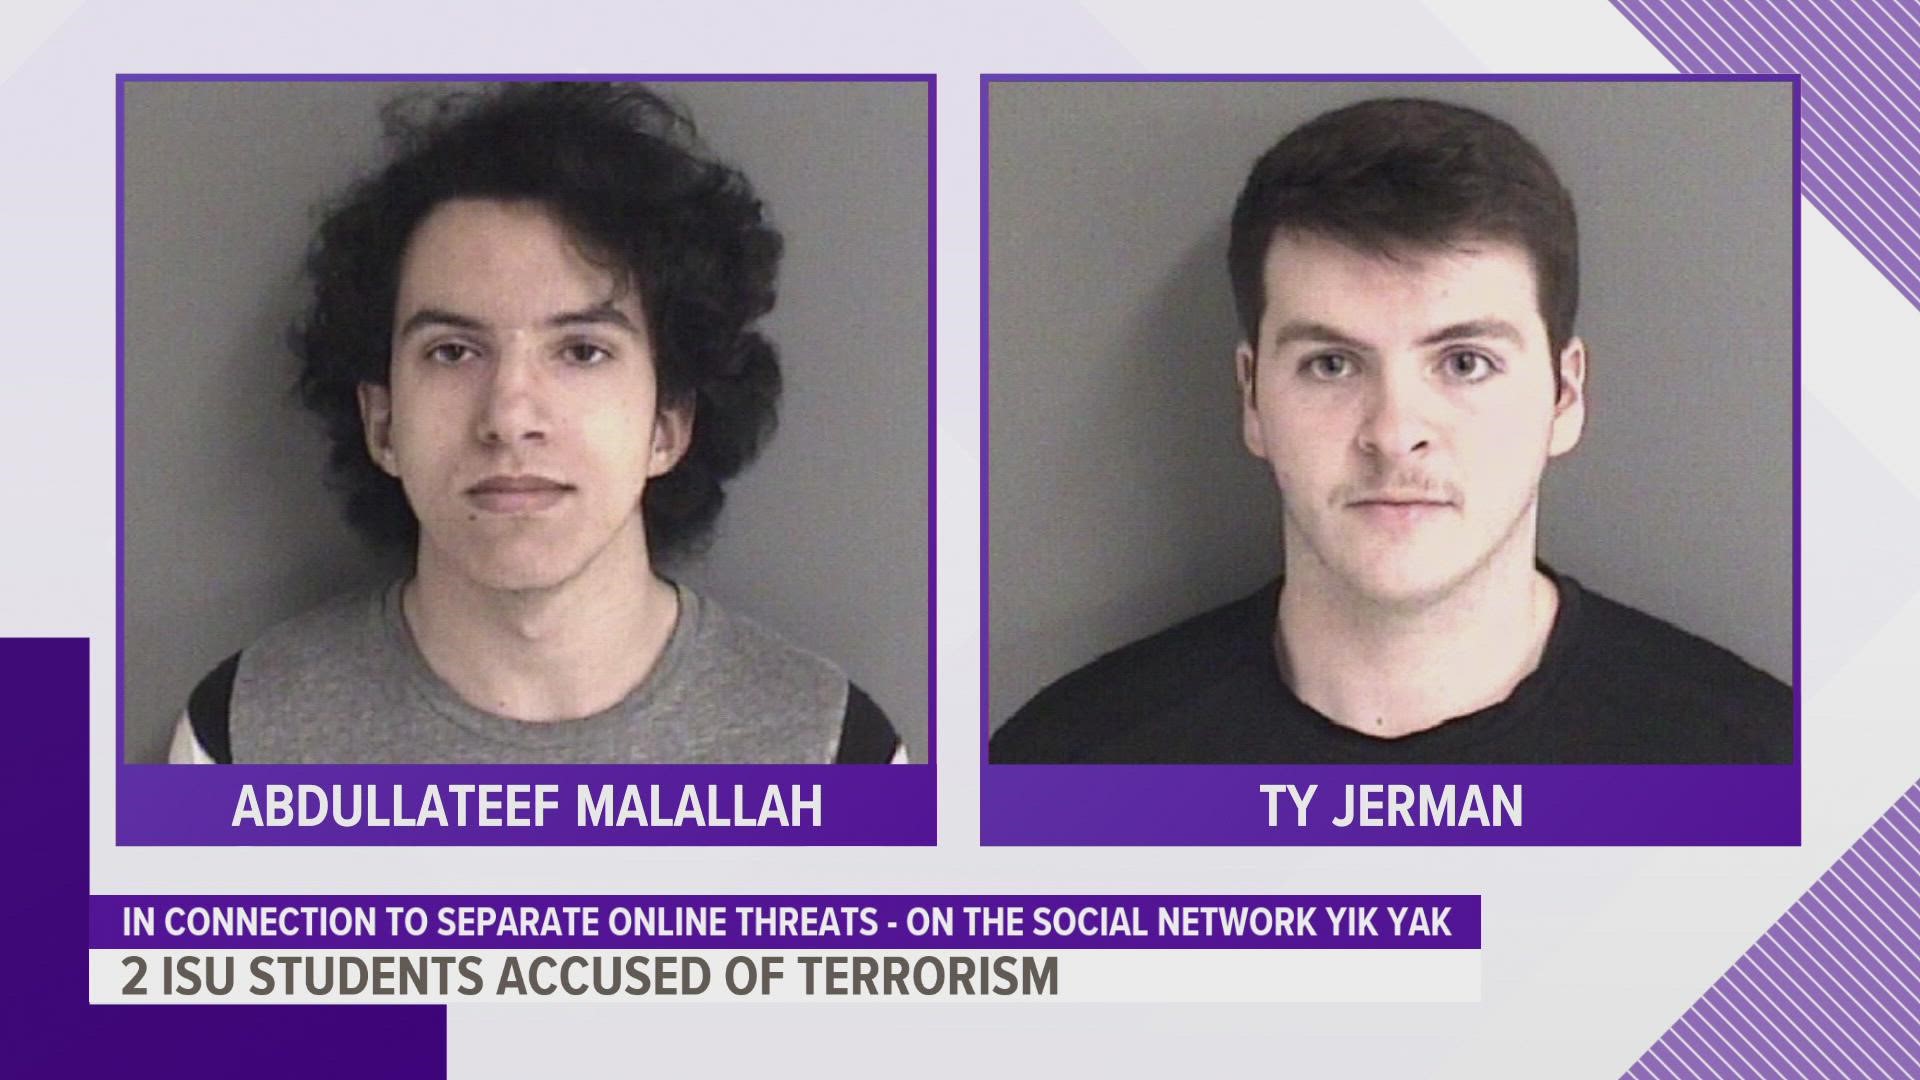 The two freshmen are facing charges in response to posts warning students to avoid certain campus buildings.